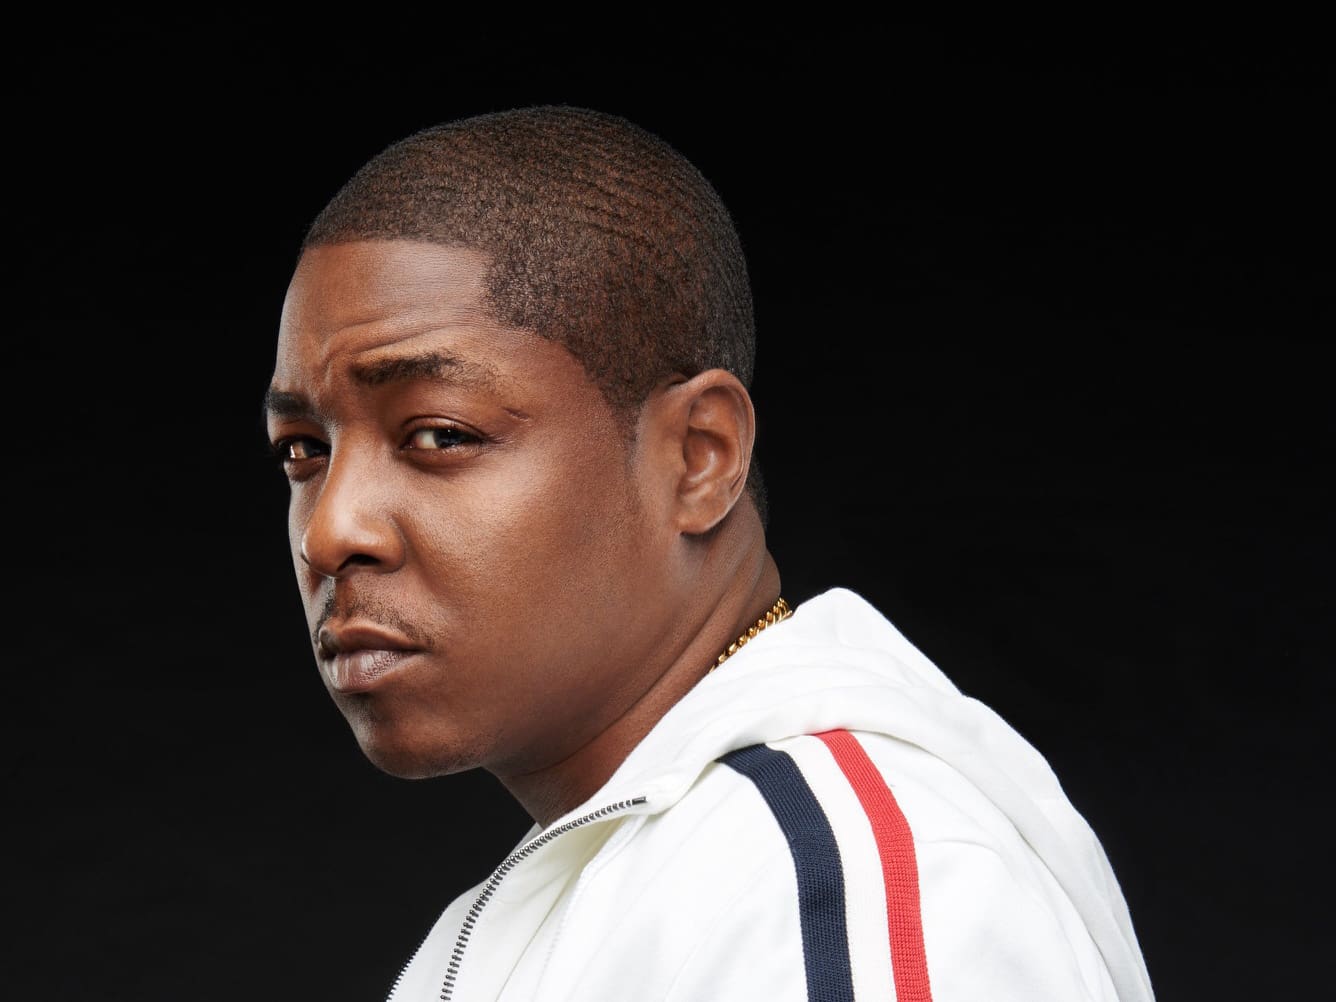 The 48-year old son of father (?) and mother(?) Jadakiss in 2024 photo. Jadakiss earned a  million dollar salary - leaving the net worth at 6 million in 2024